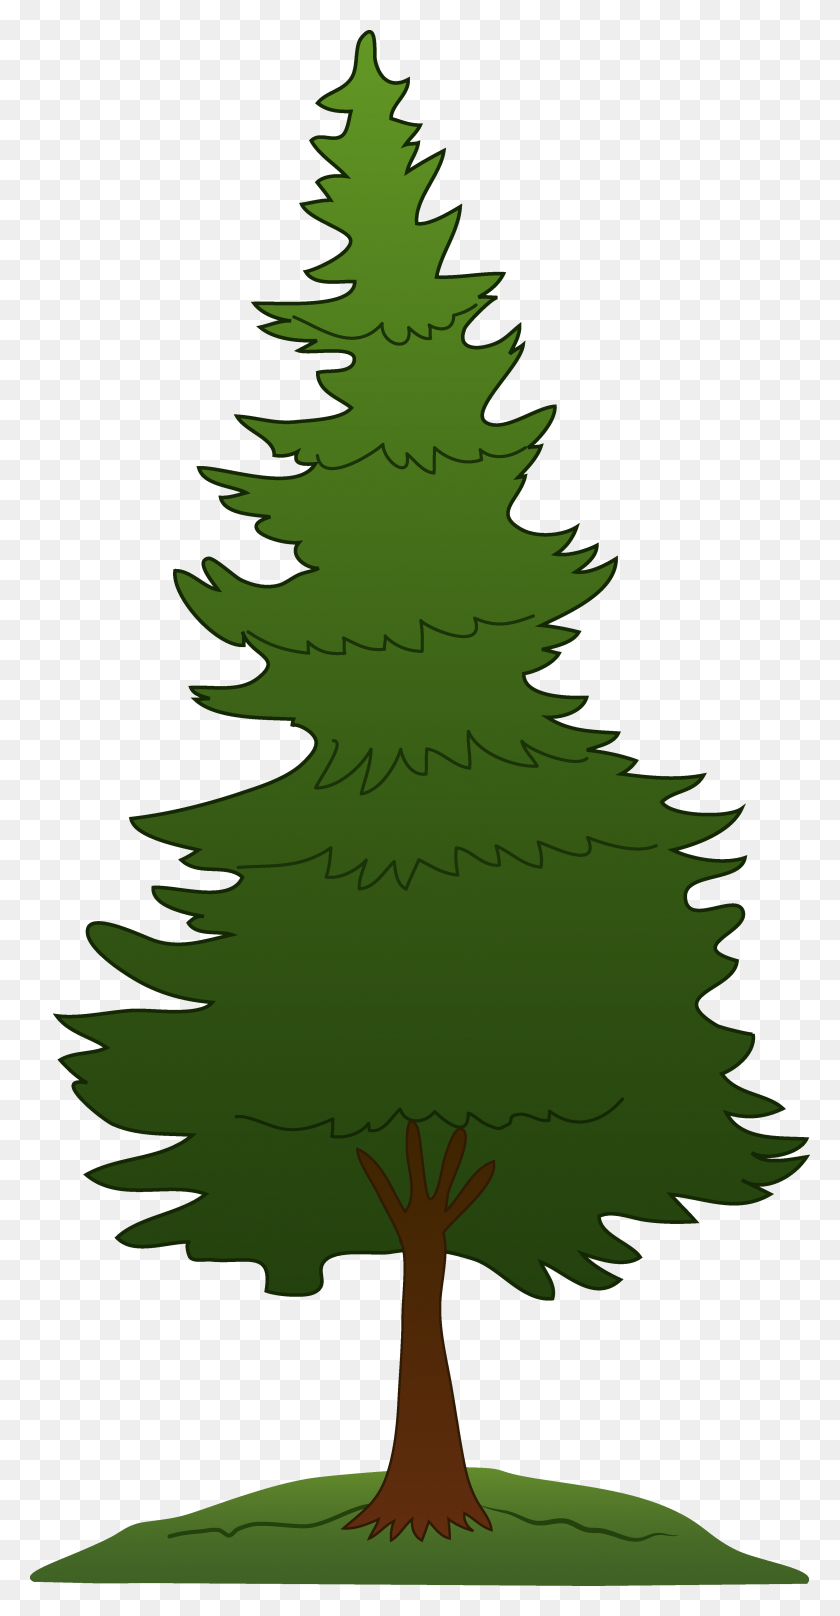 3256x6498 Clipart Tree Without Leaves - Tree Clipart No Leaves